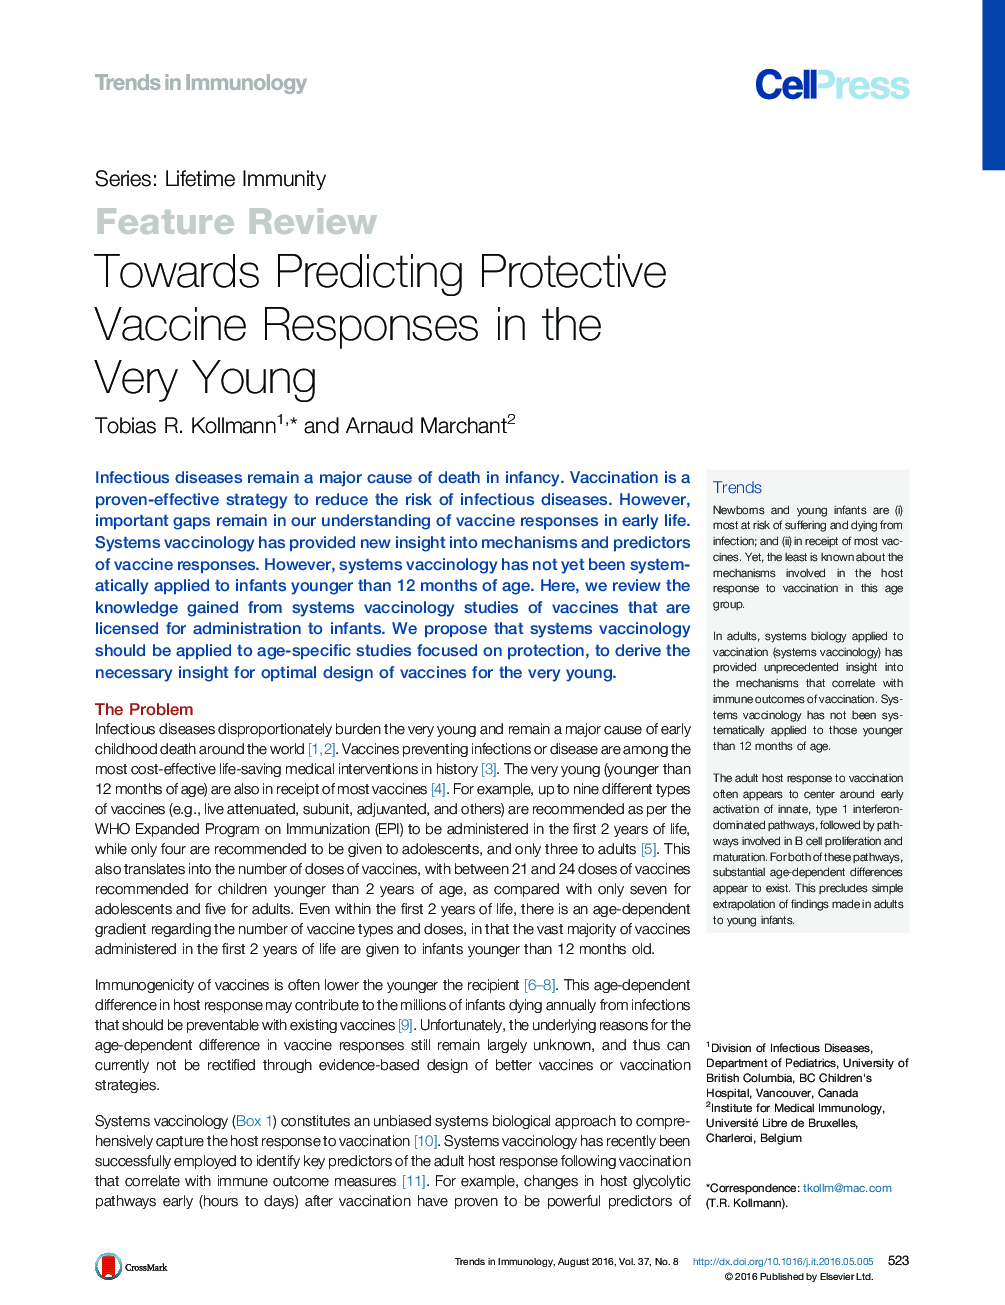 Towards Predicting Protective Vaccine Responses in the Very Young